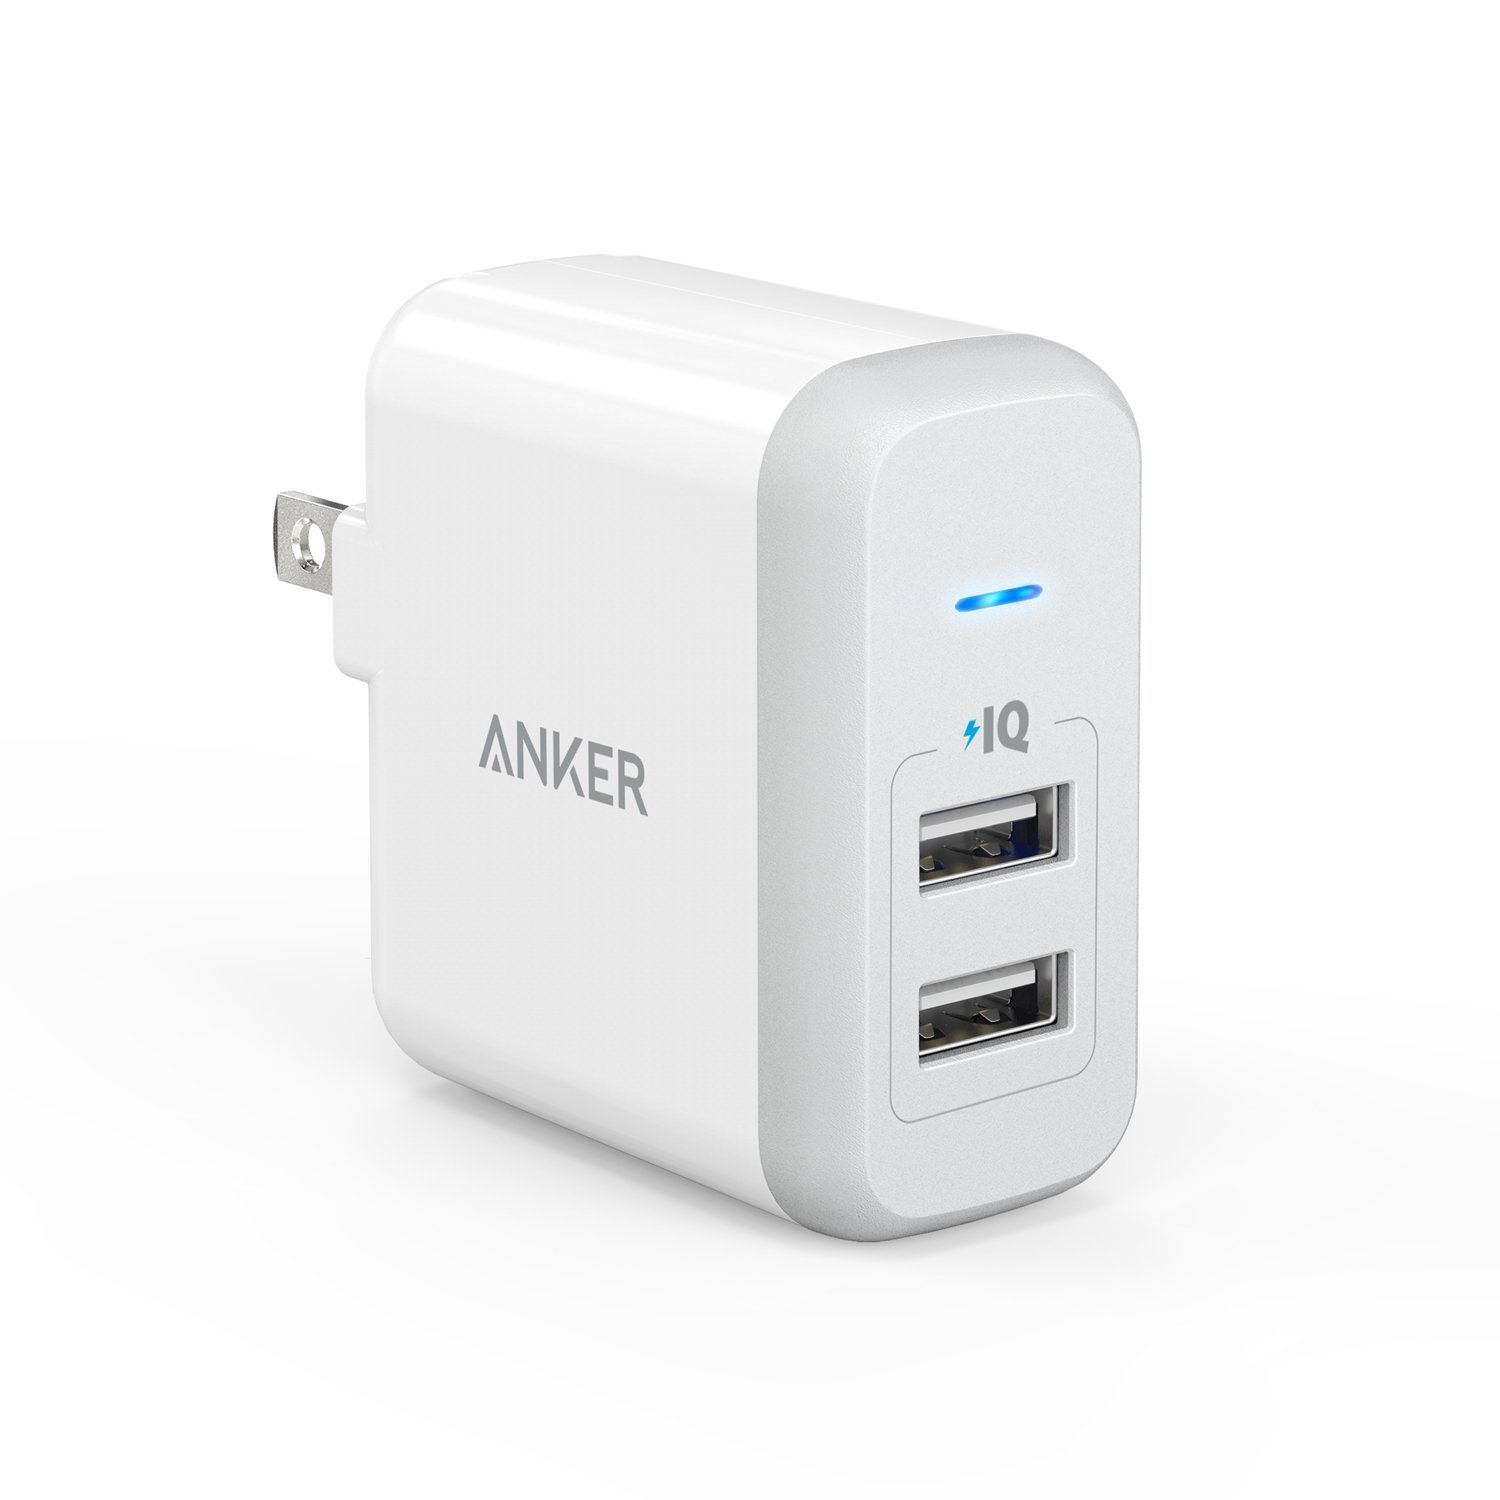 Anker 2-port 24W USB wall charger for $6.49 with code